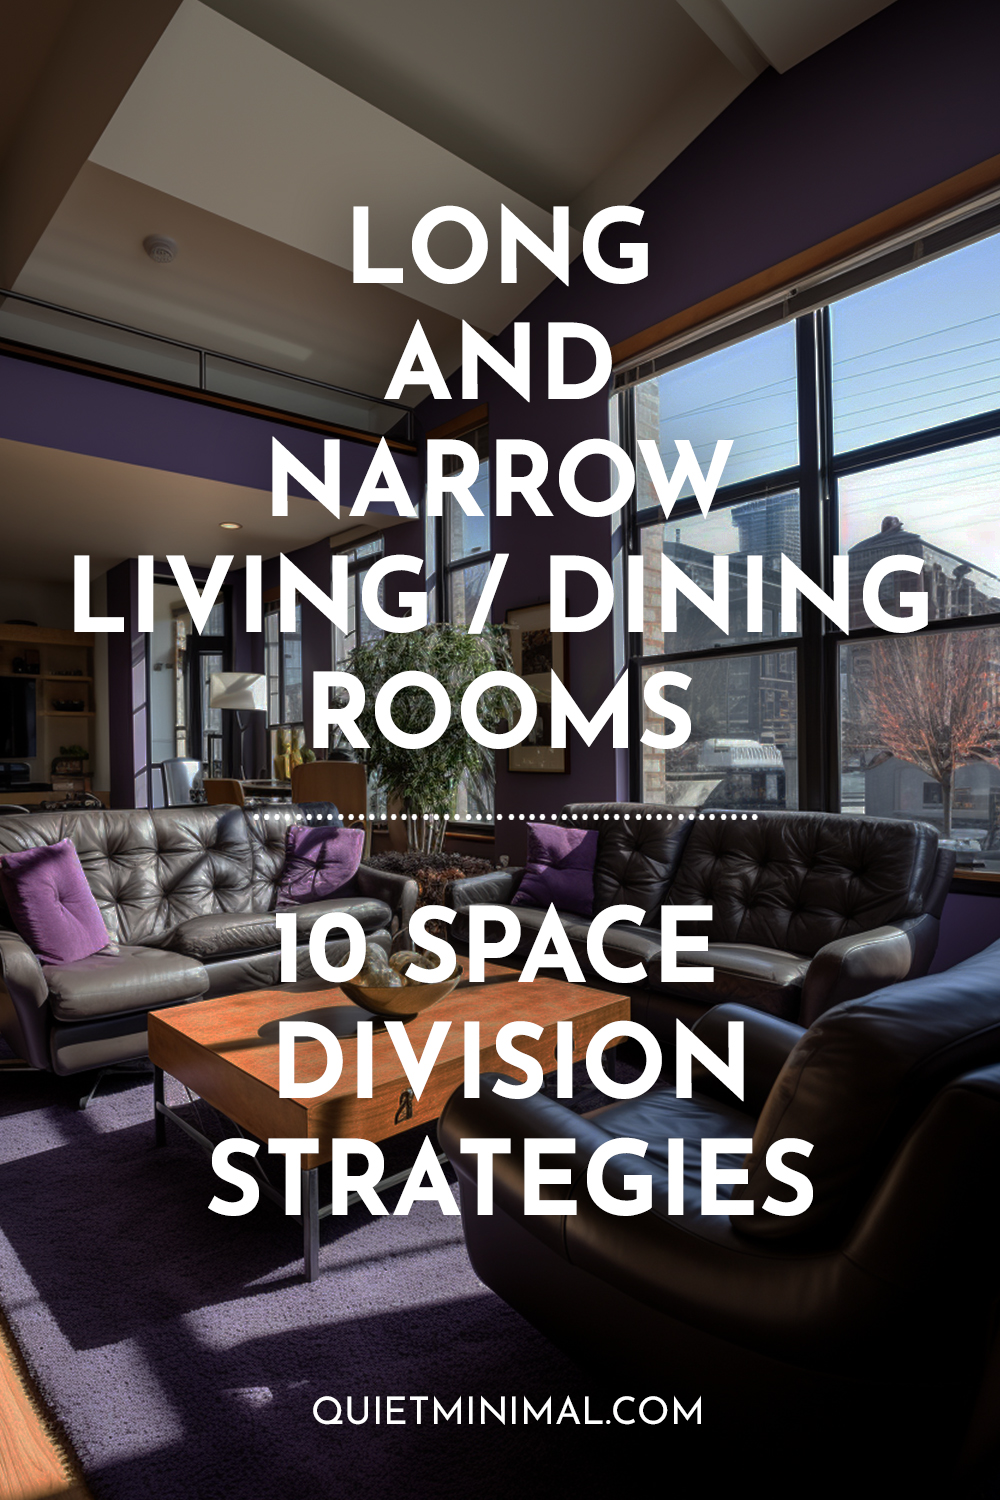 Long and narrow living and dining rooms with 10 division strategies.